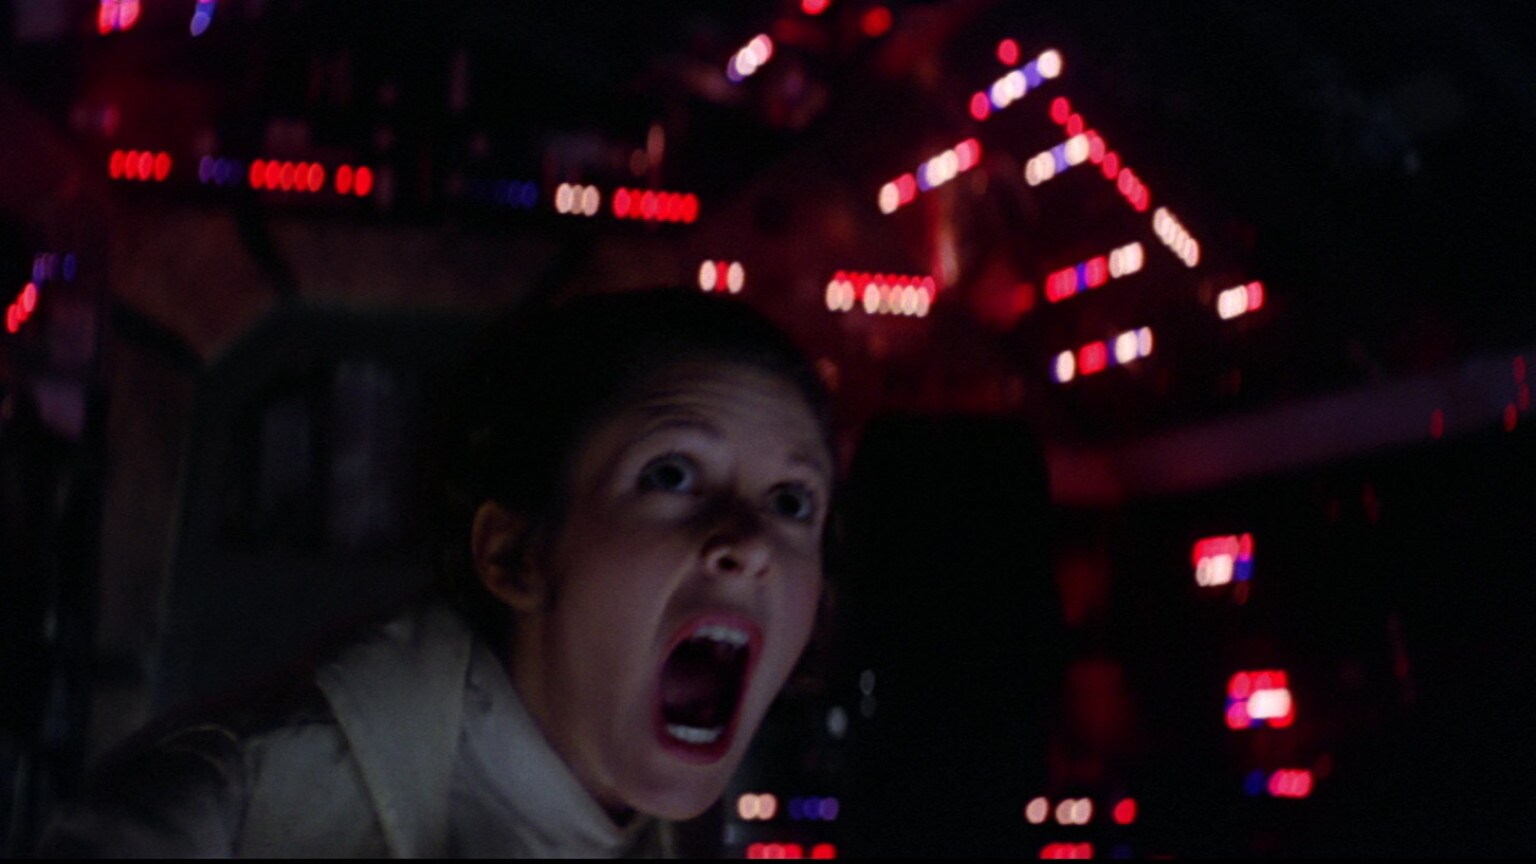 Leia being scared by a mynock